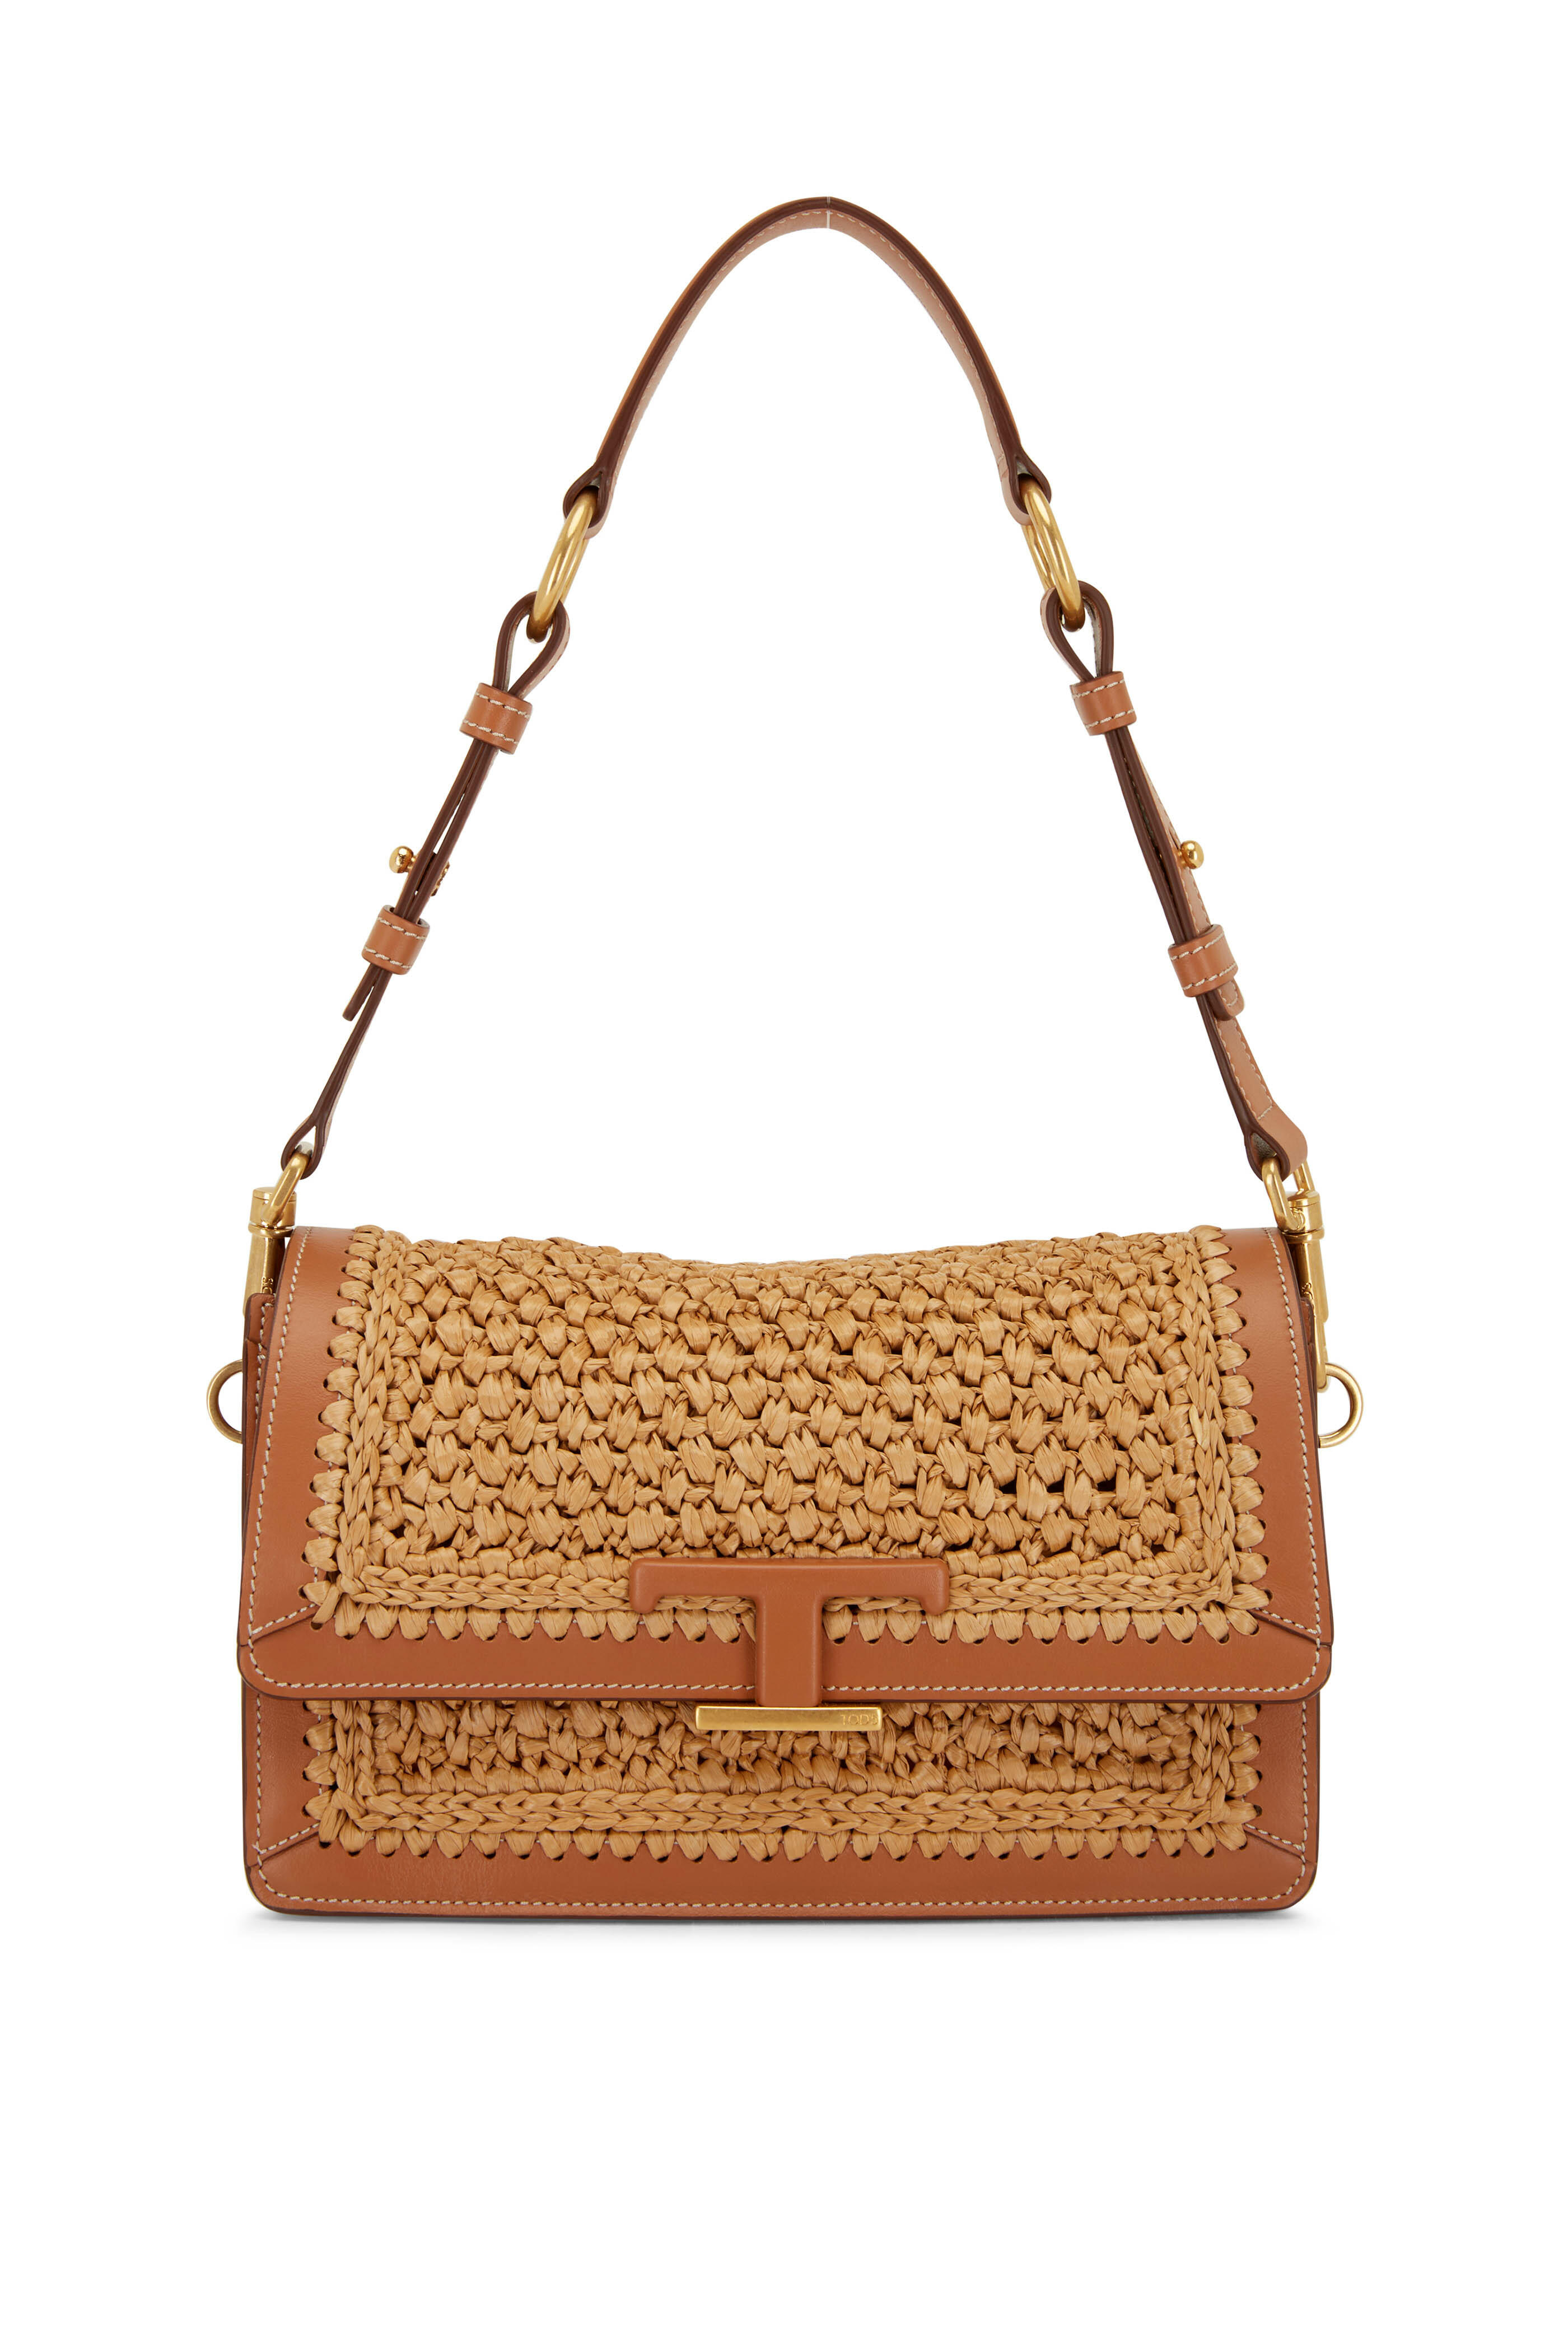 Tod's crochet-knit Leather Tote Bag - Farfetch